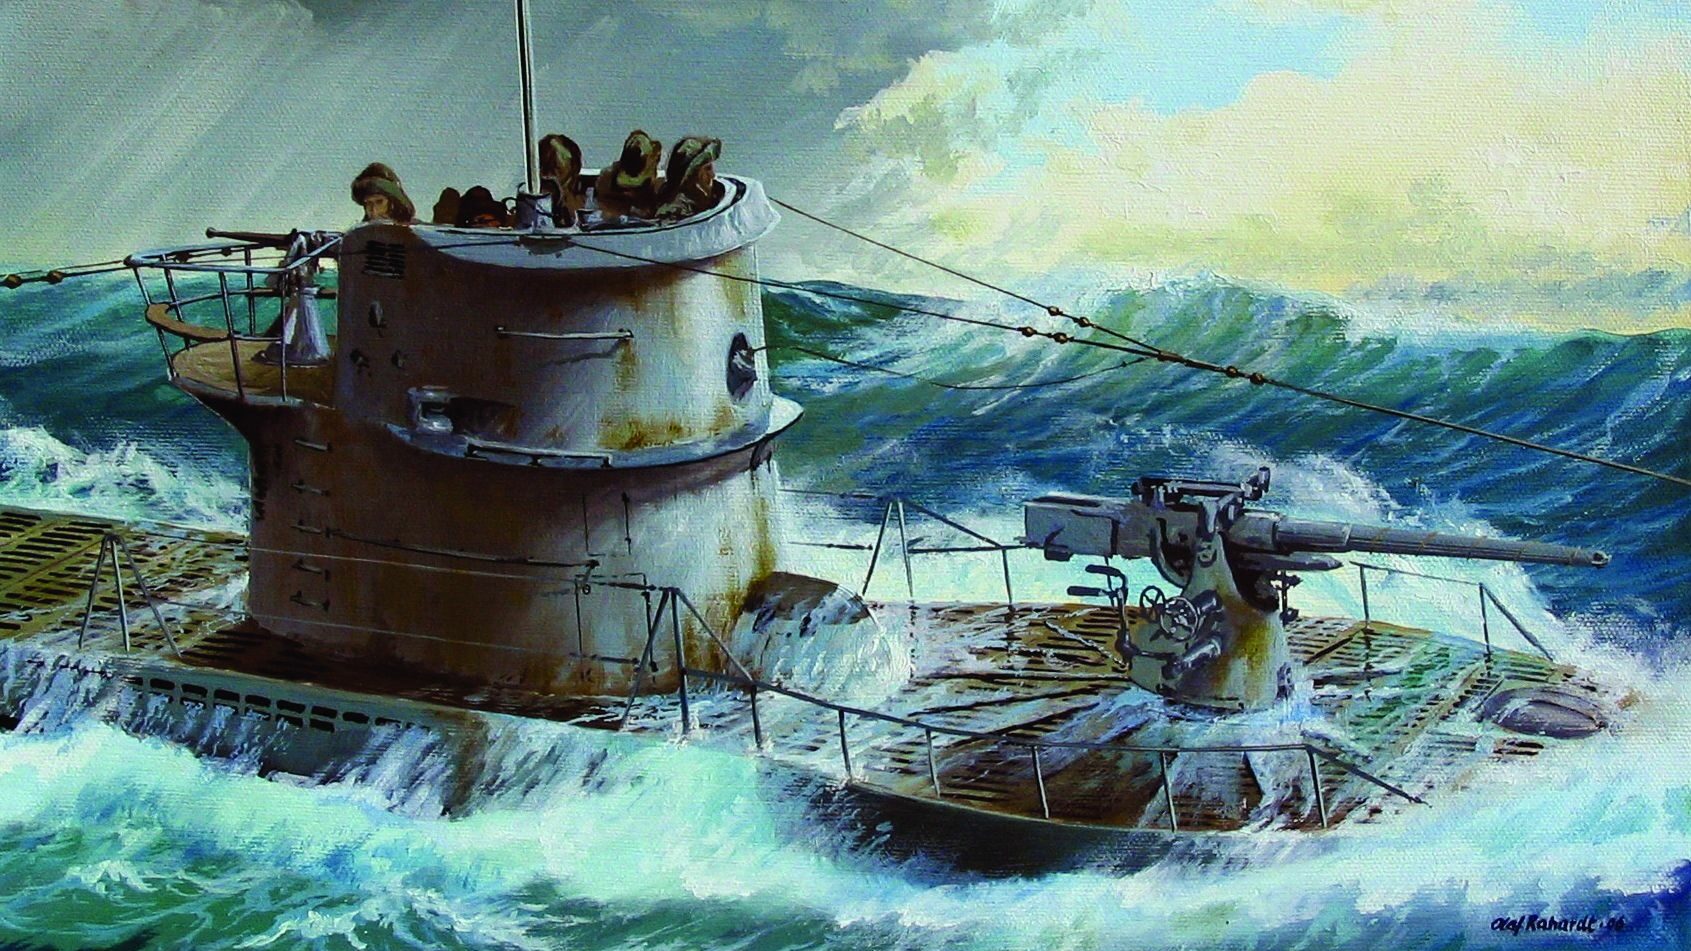 A German submarine rolls on a heavy sea during a mission in the Atlantic. Painting by Olaf Rahardt, 2000.